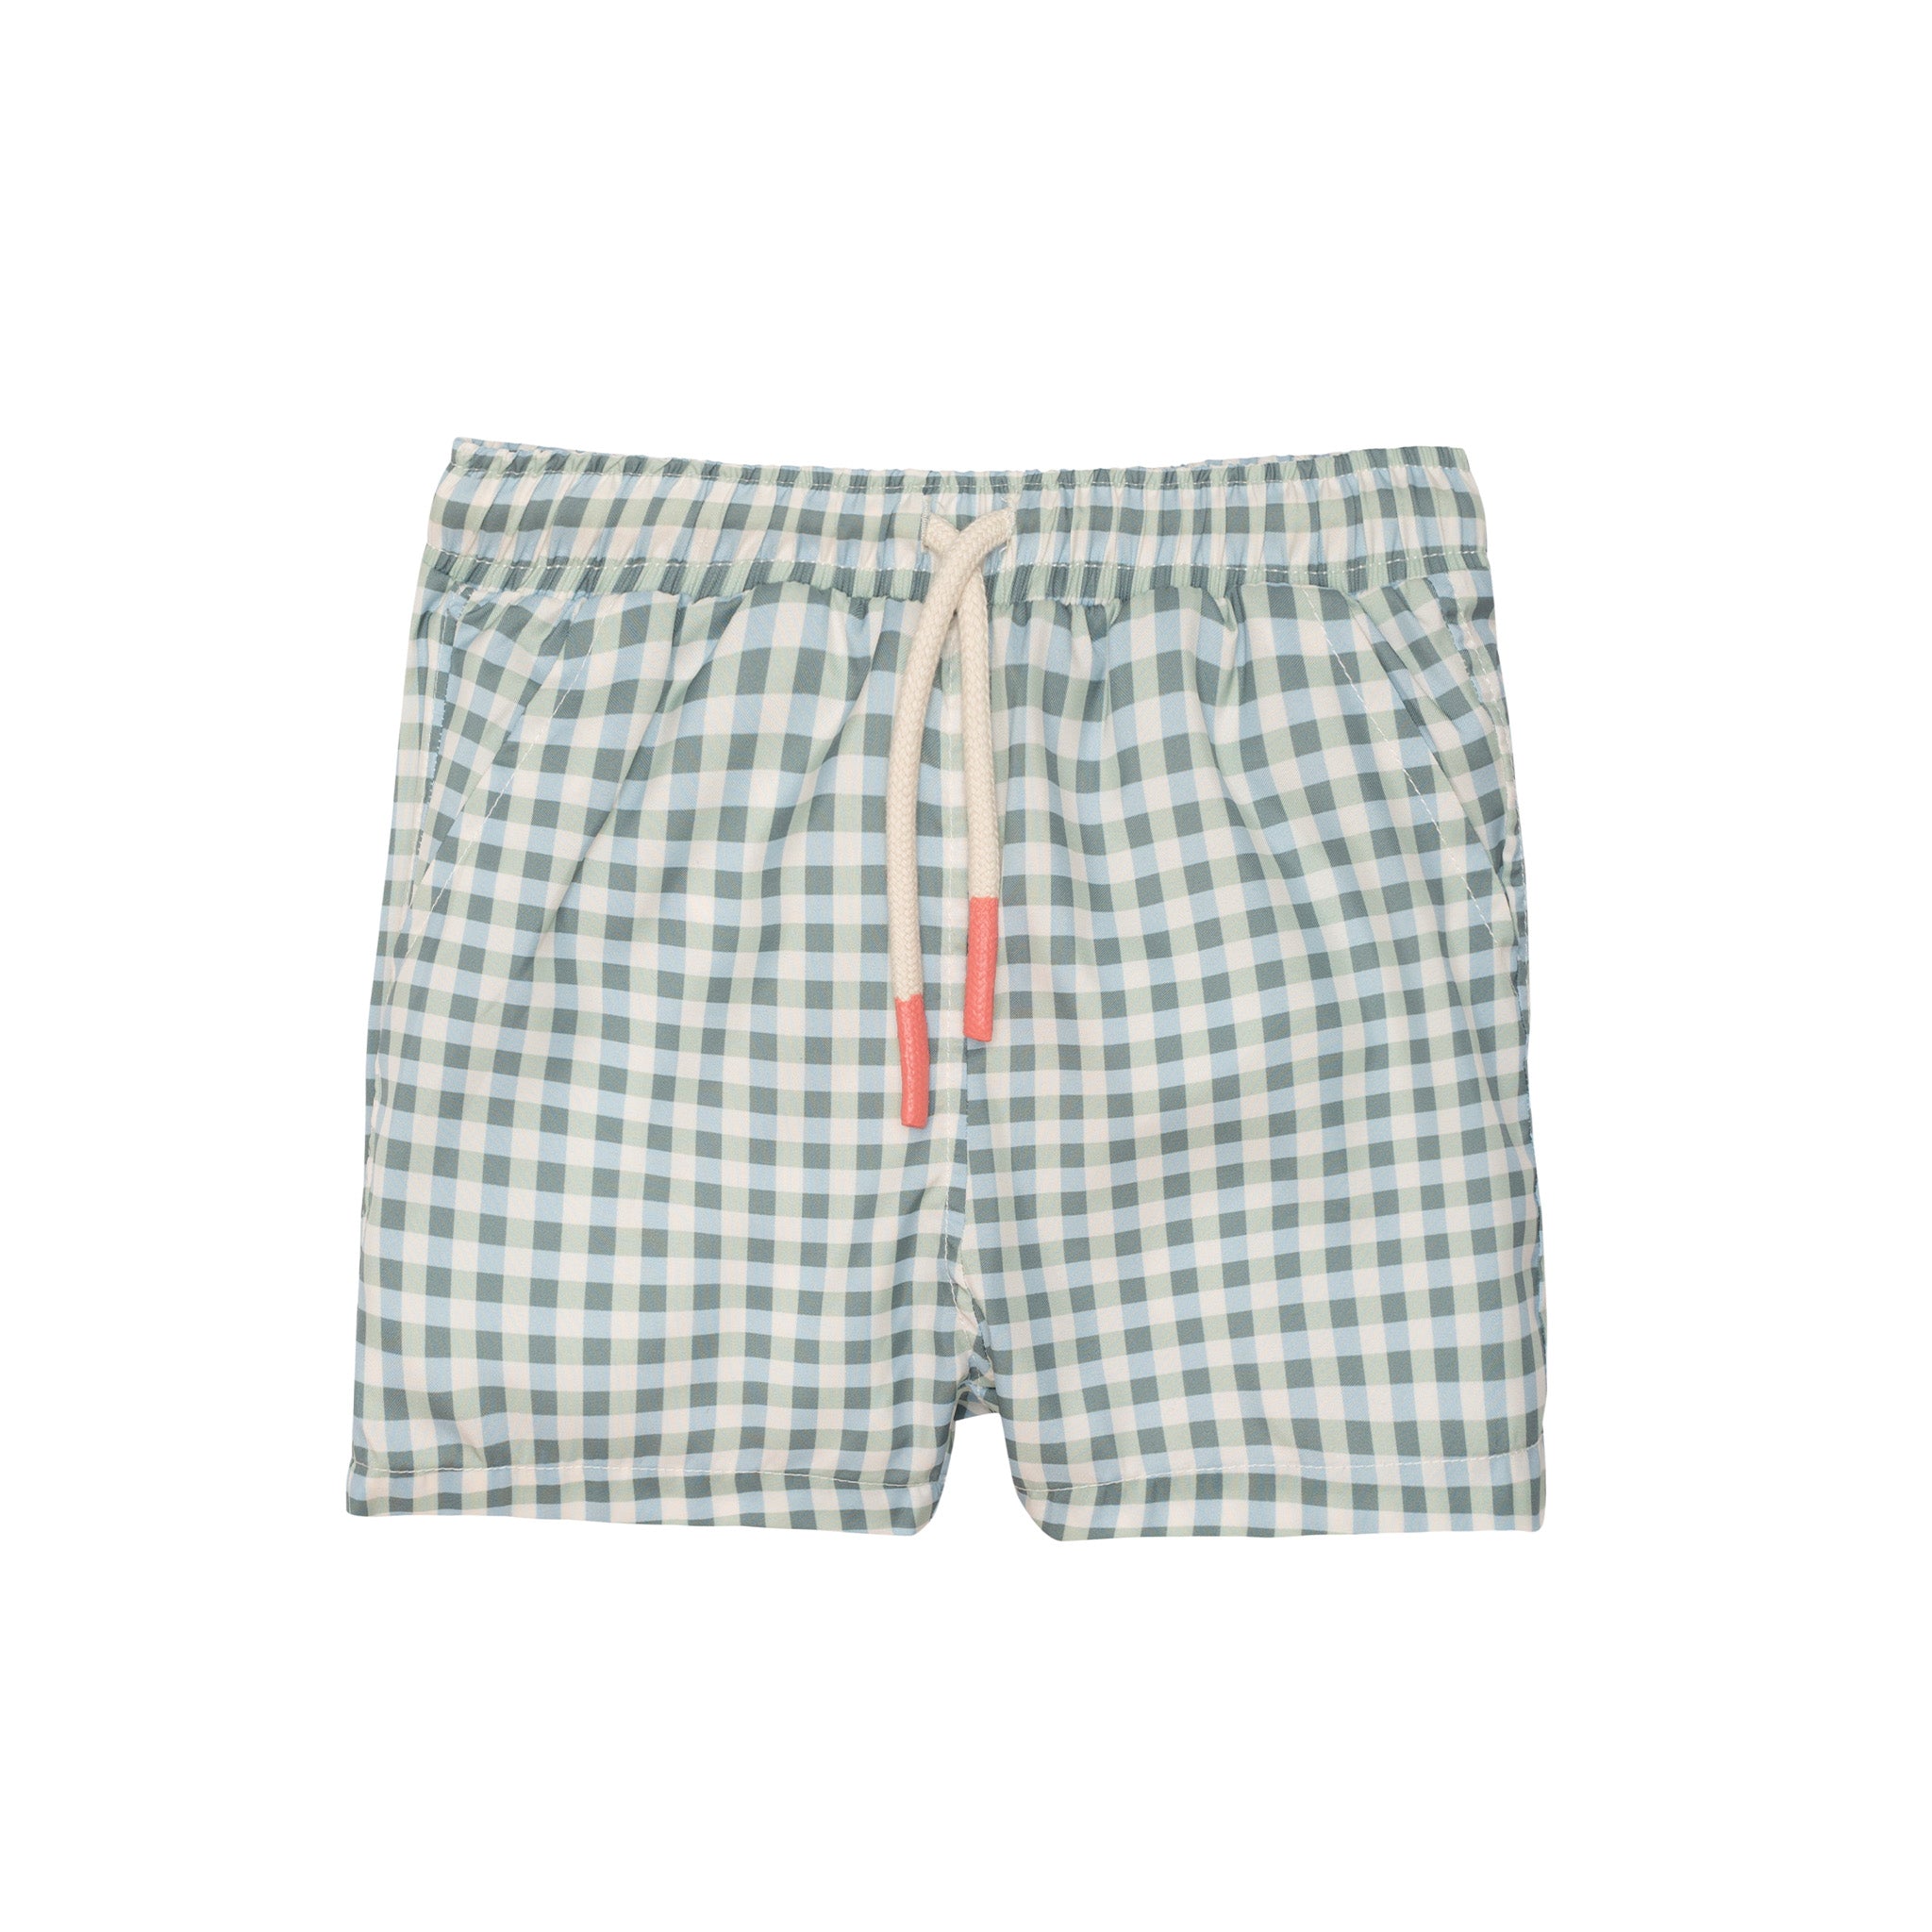 Seaqual Recycled Polyester Gingham Baby Swim Trunks